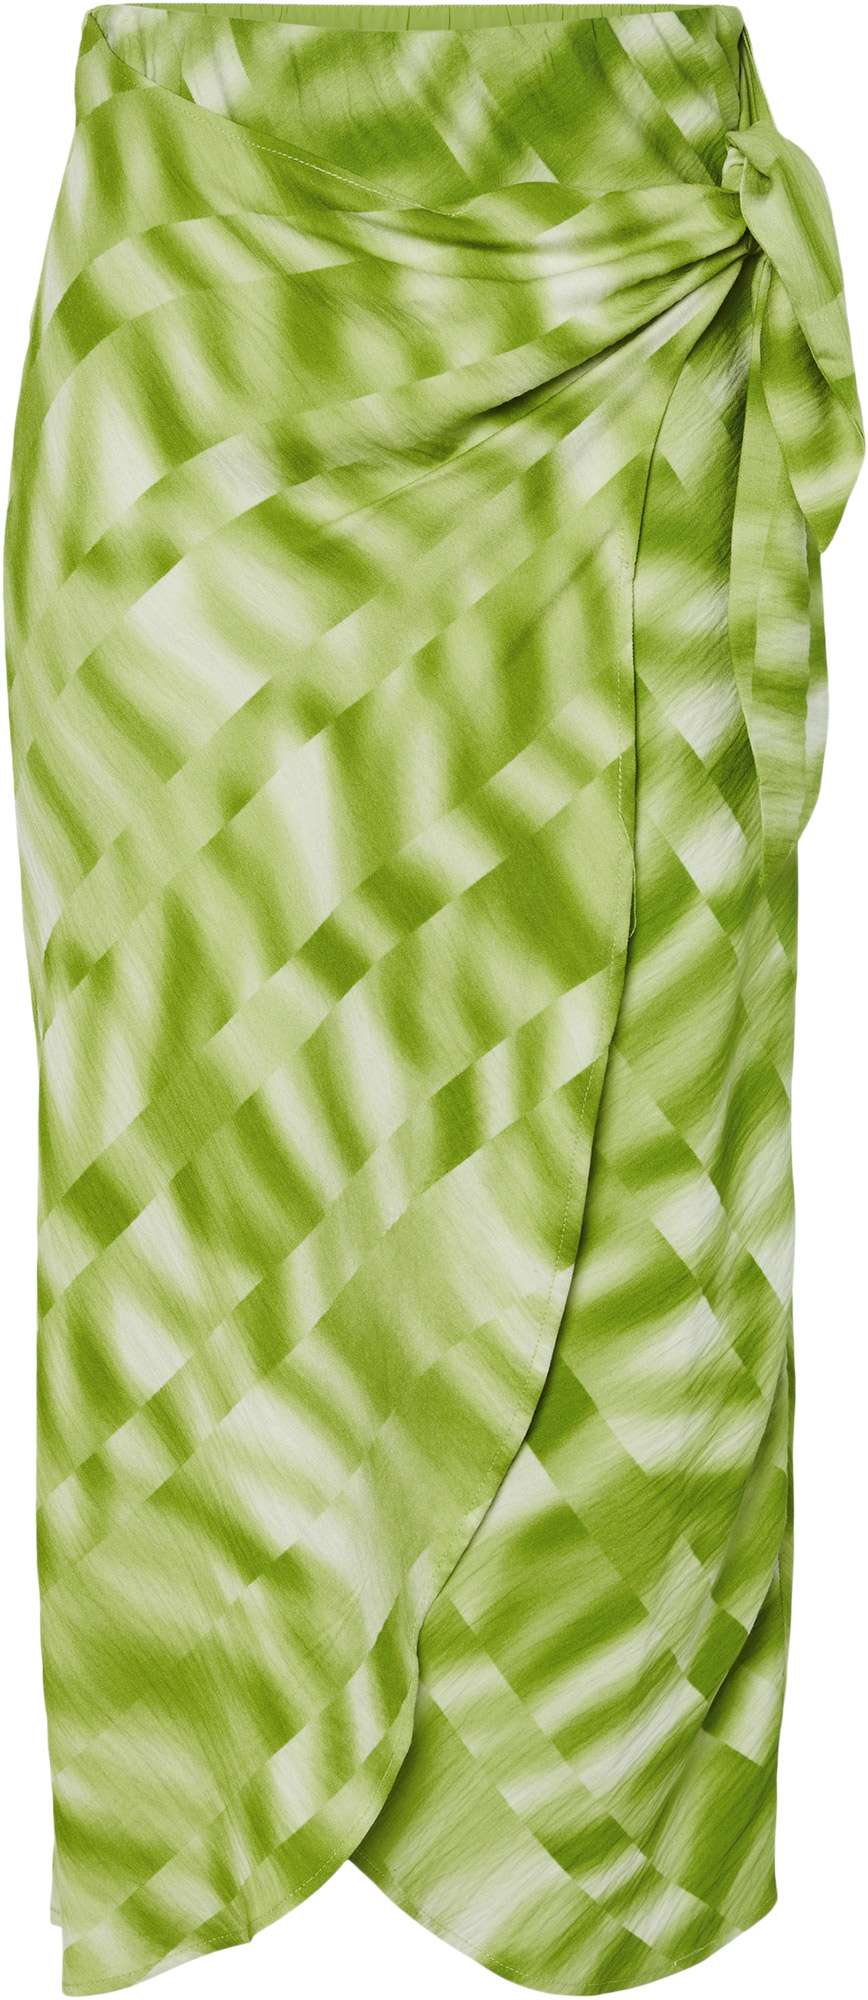 Y.A.S Yaslime hw midi wrap skirt s. parrot green/lime